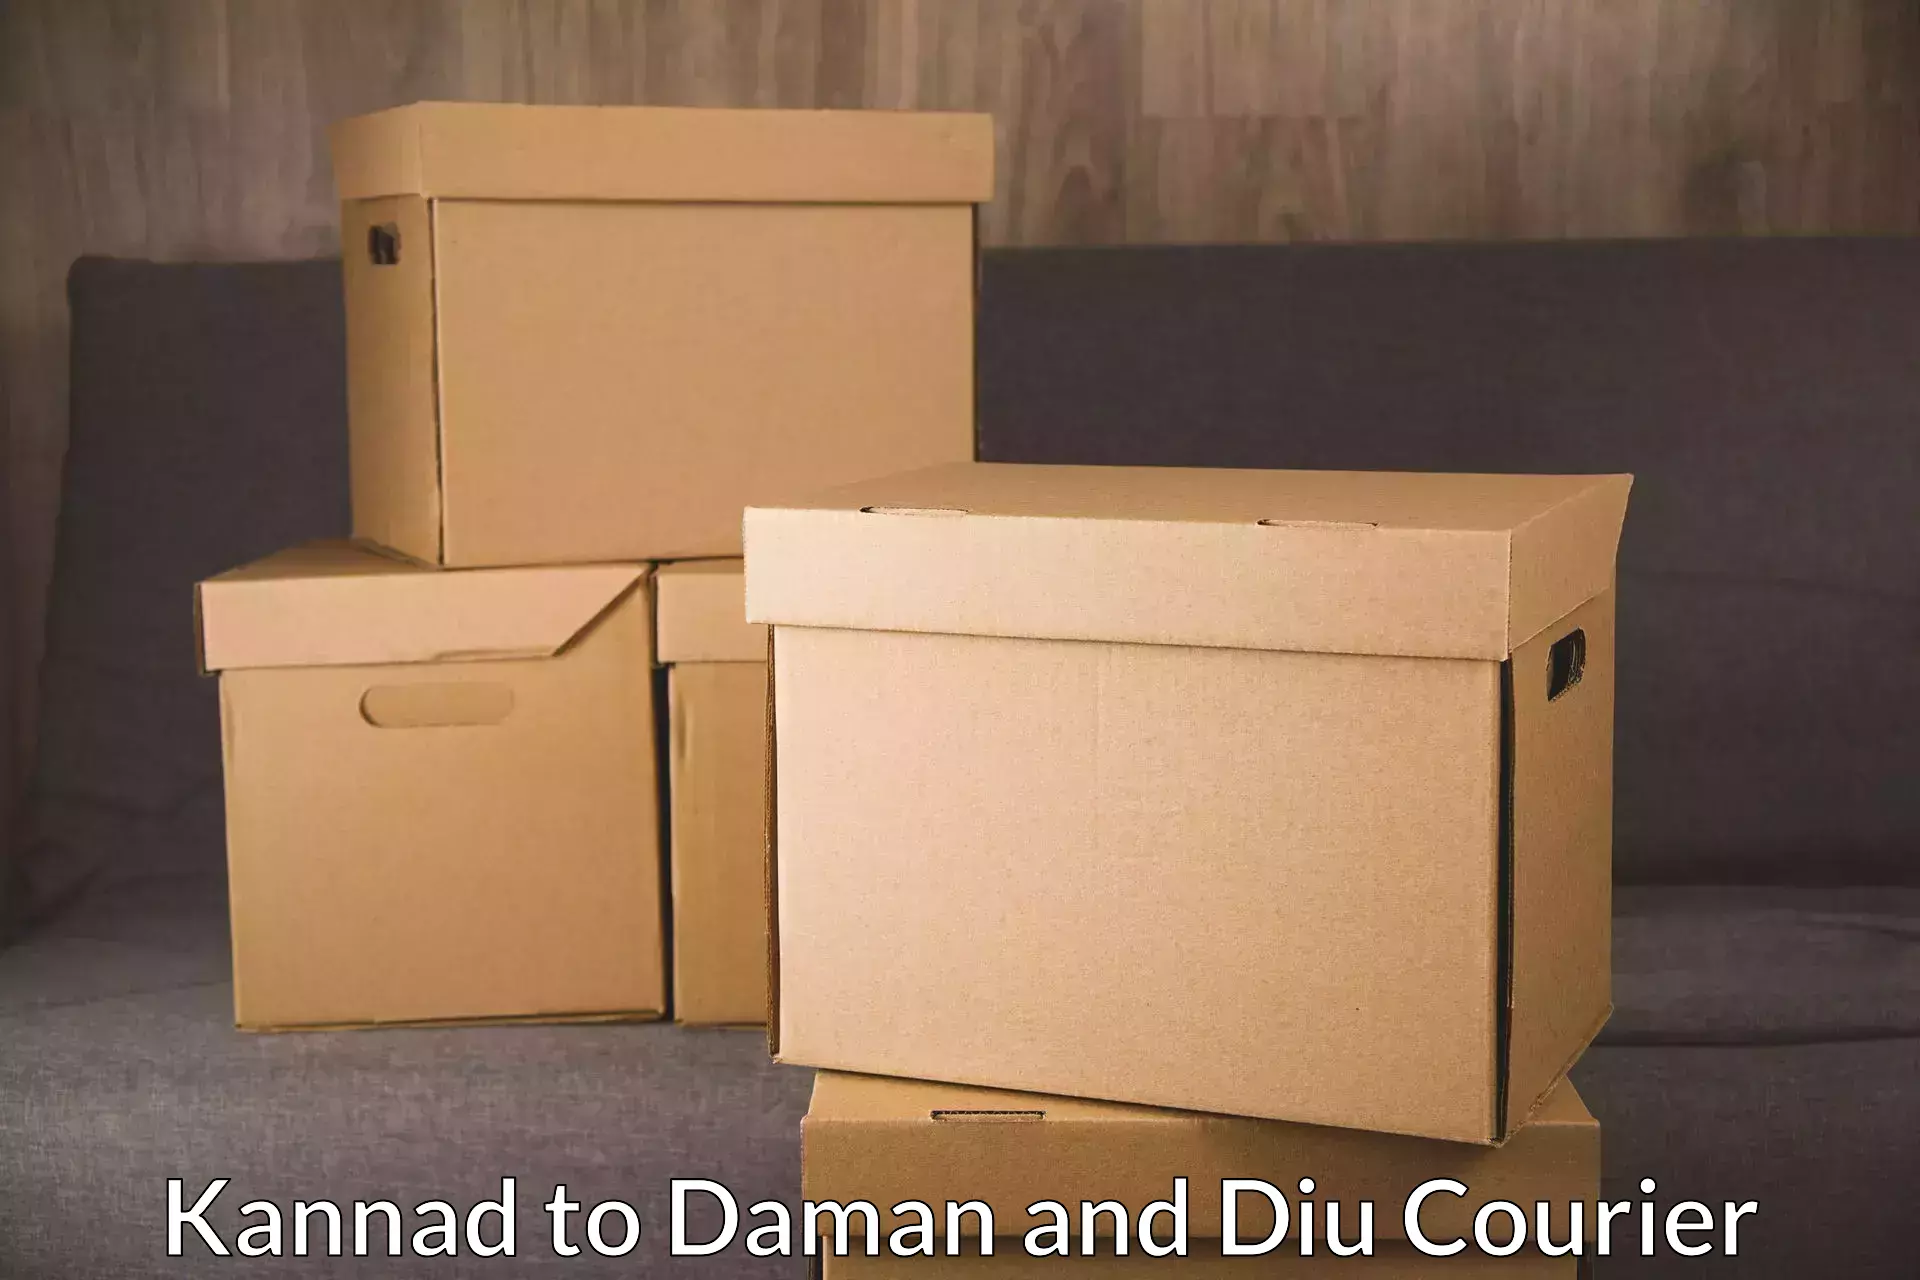 Package delivery network Kannad to Diu